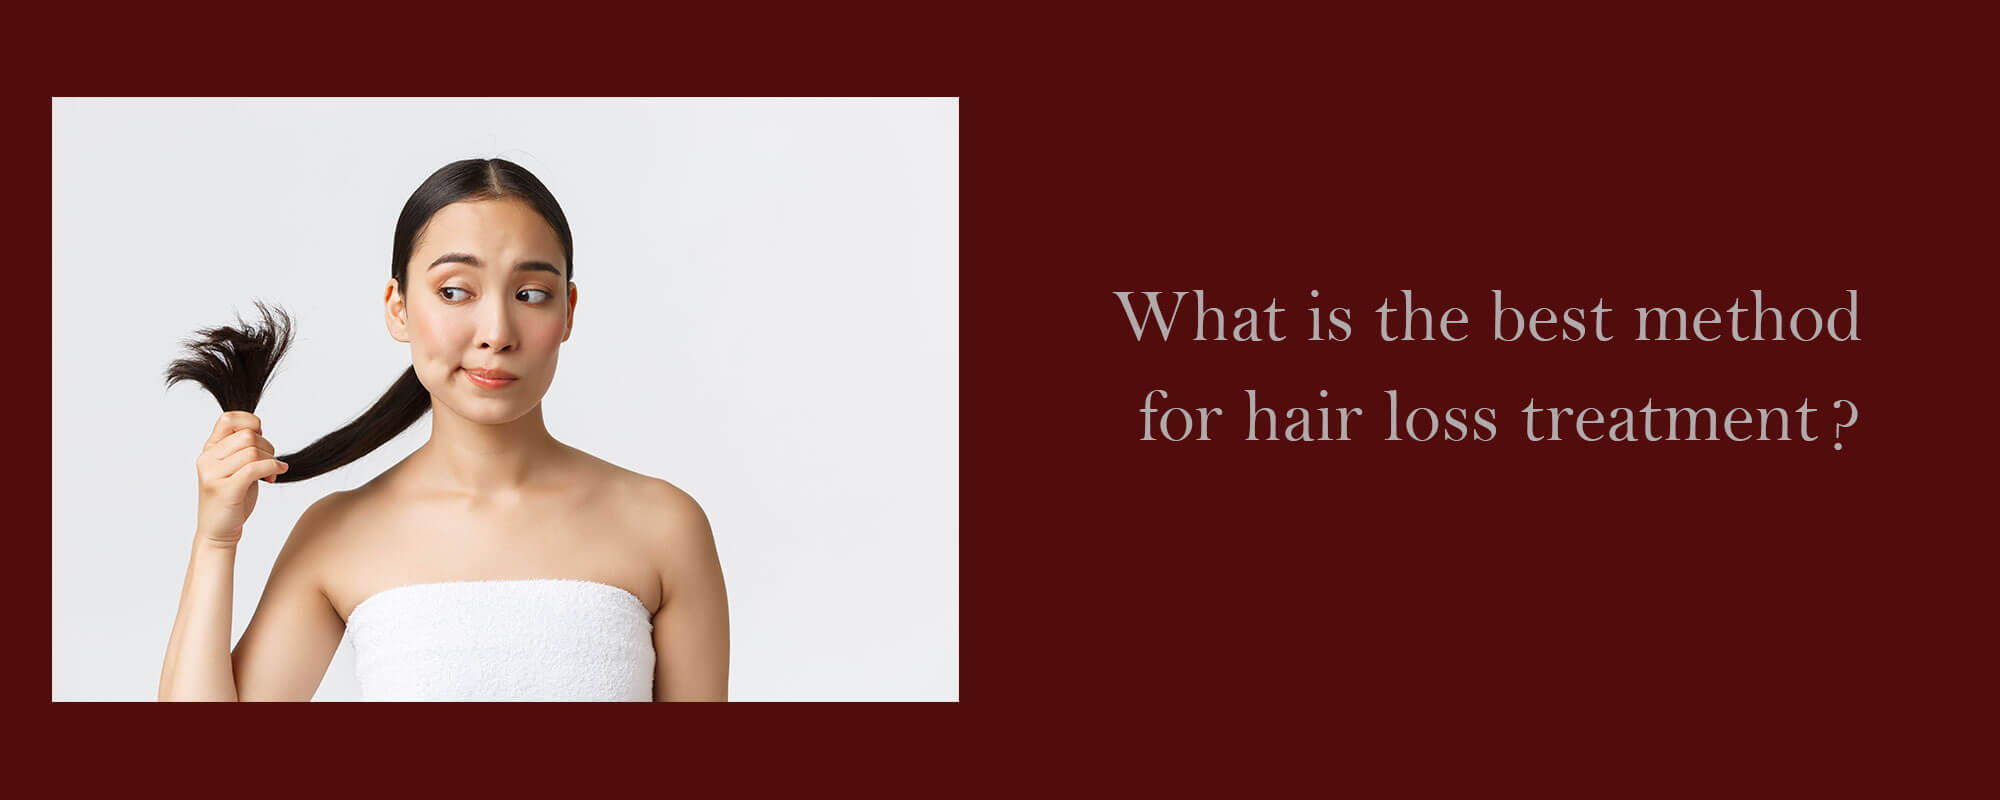 What is the best method for hair loss treatment? - 1